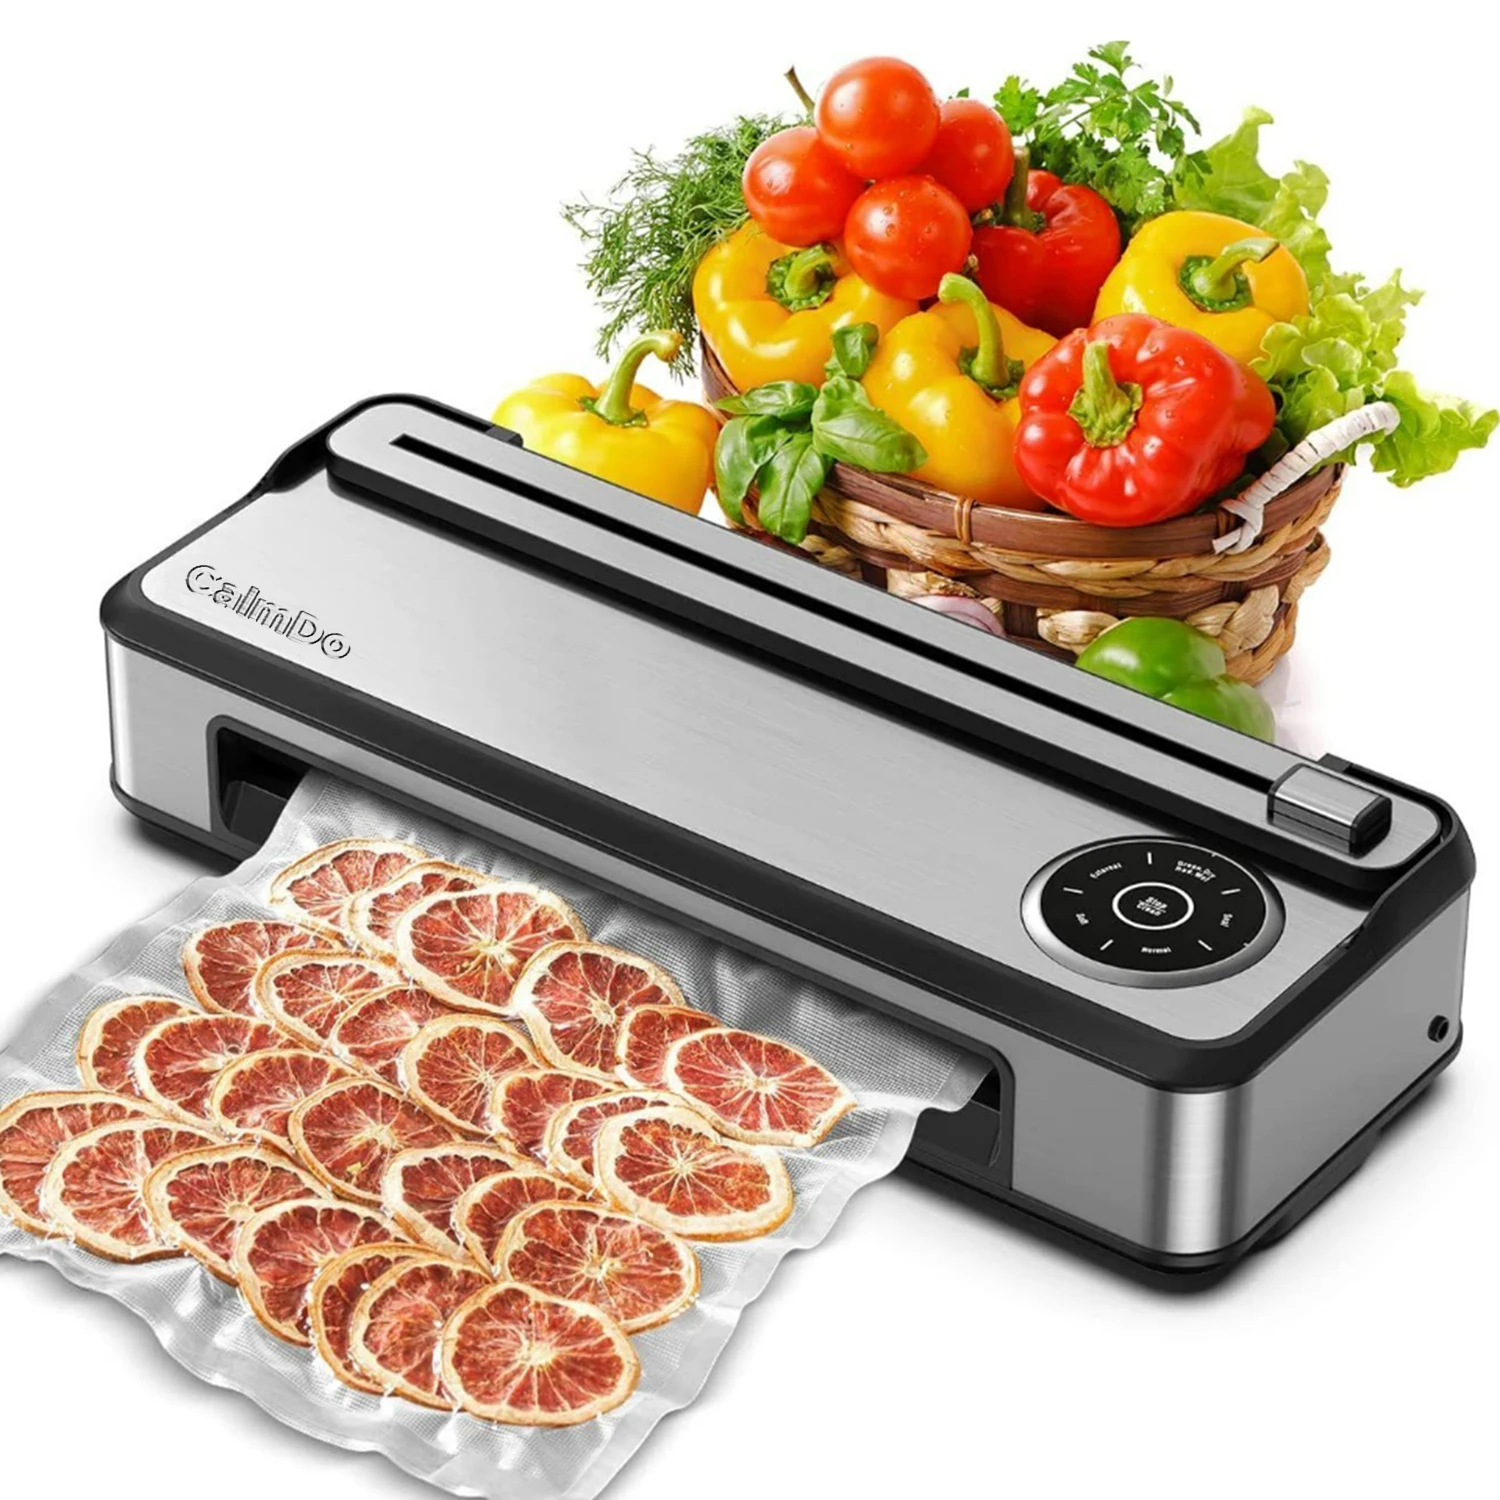 Household Vacuum Sealer Machine for Food Saver and Sous Vide